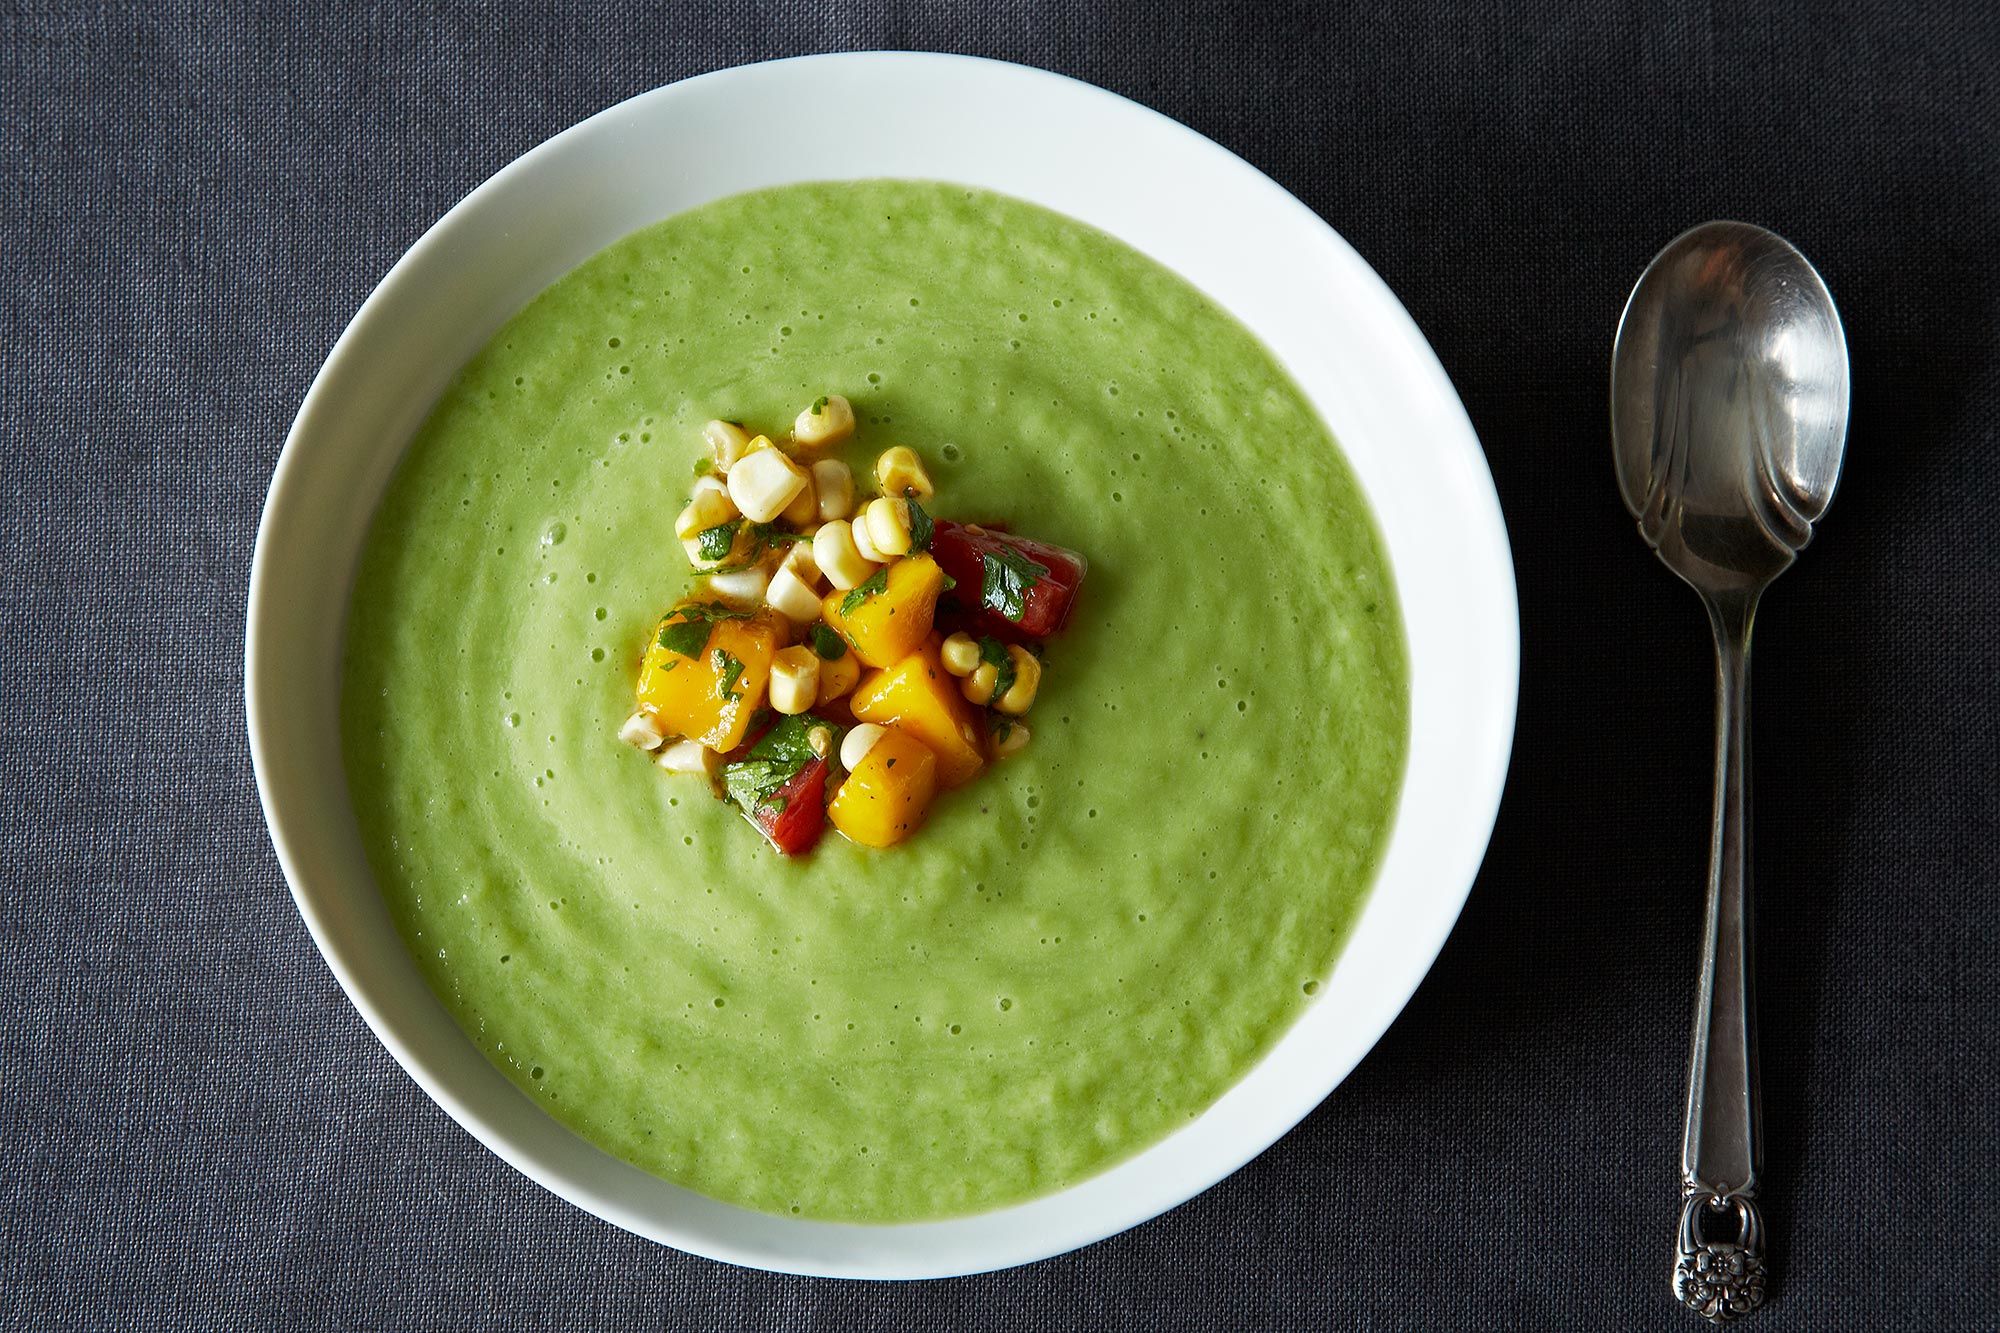 Chilled Cucumber and Avocado Soup on Food52